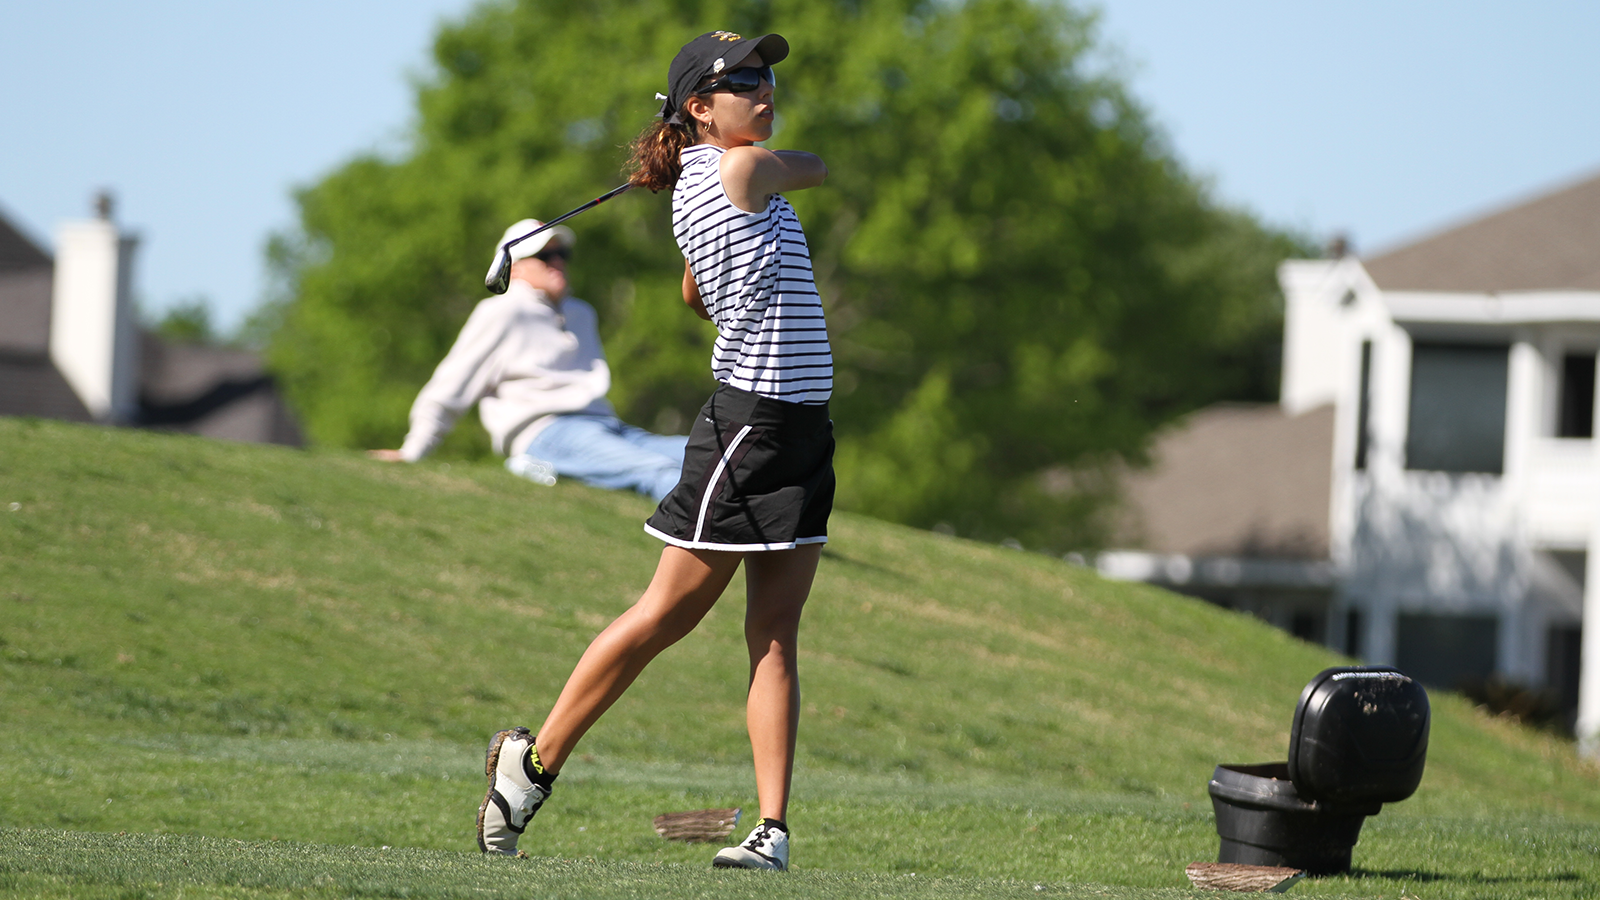 Women's golf in fourth after one round